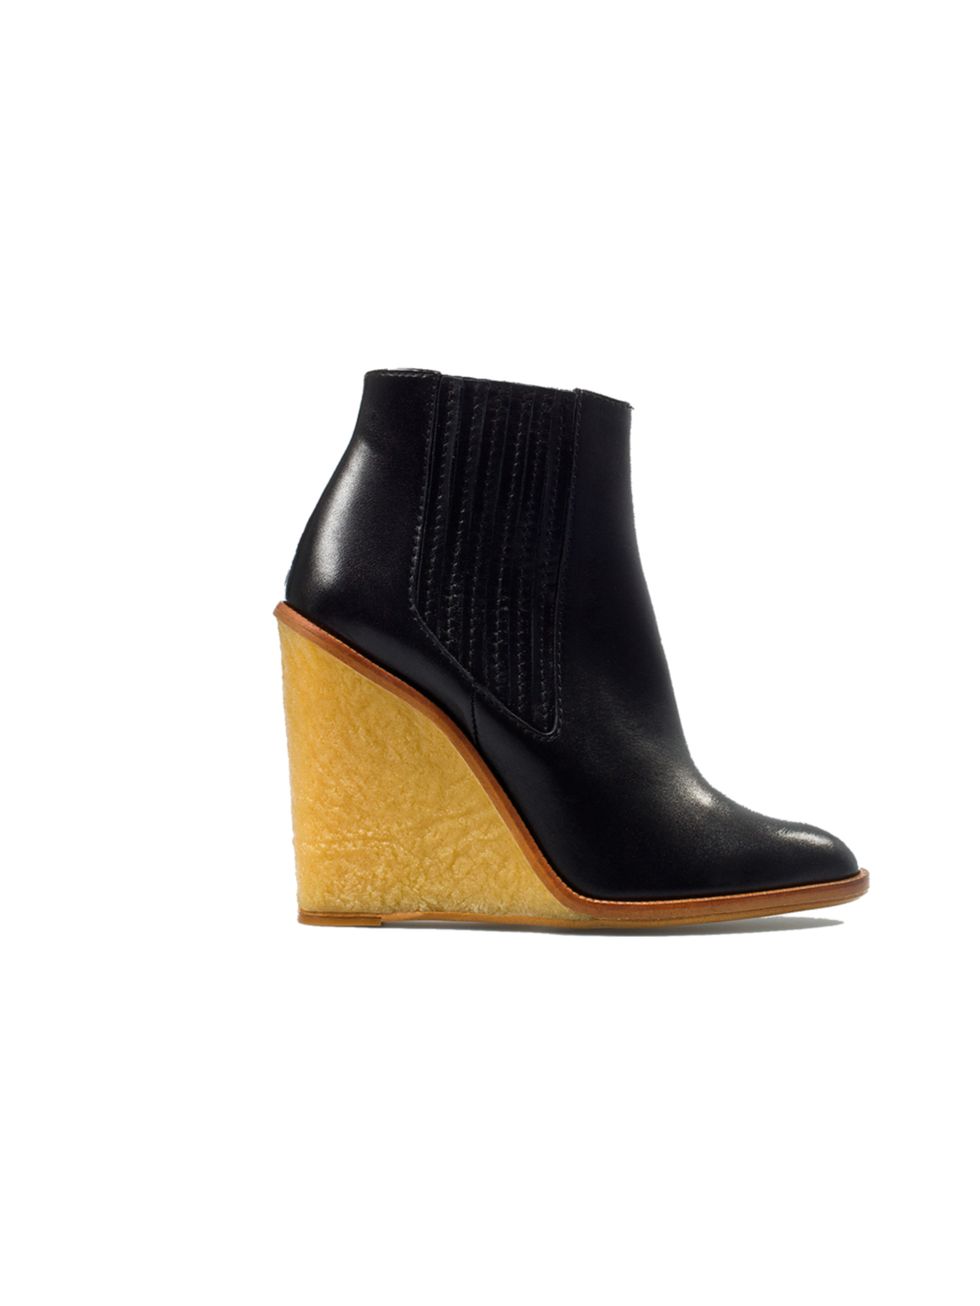 <p>There really is no beating Zaras footwear this season. This weeks new season-defying new ankle boots prove are a case in point <a href="http://www.zara.com/webapp/wcs/stores/servlet/product/uk/en/zara-neu-W2012/287002/996536/WEDGE%20ANKLE%20BOOT">Za